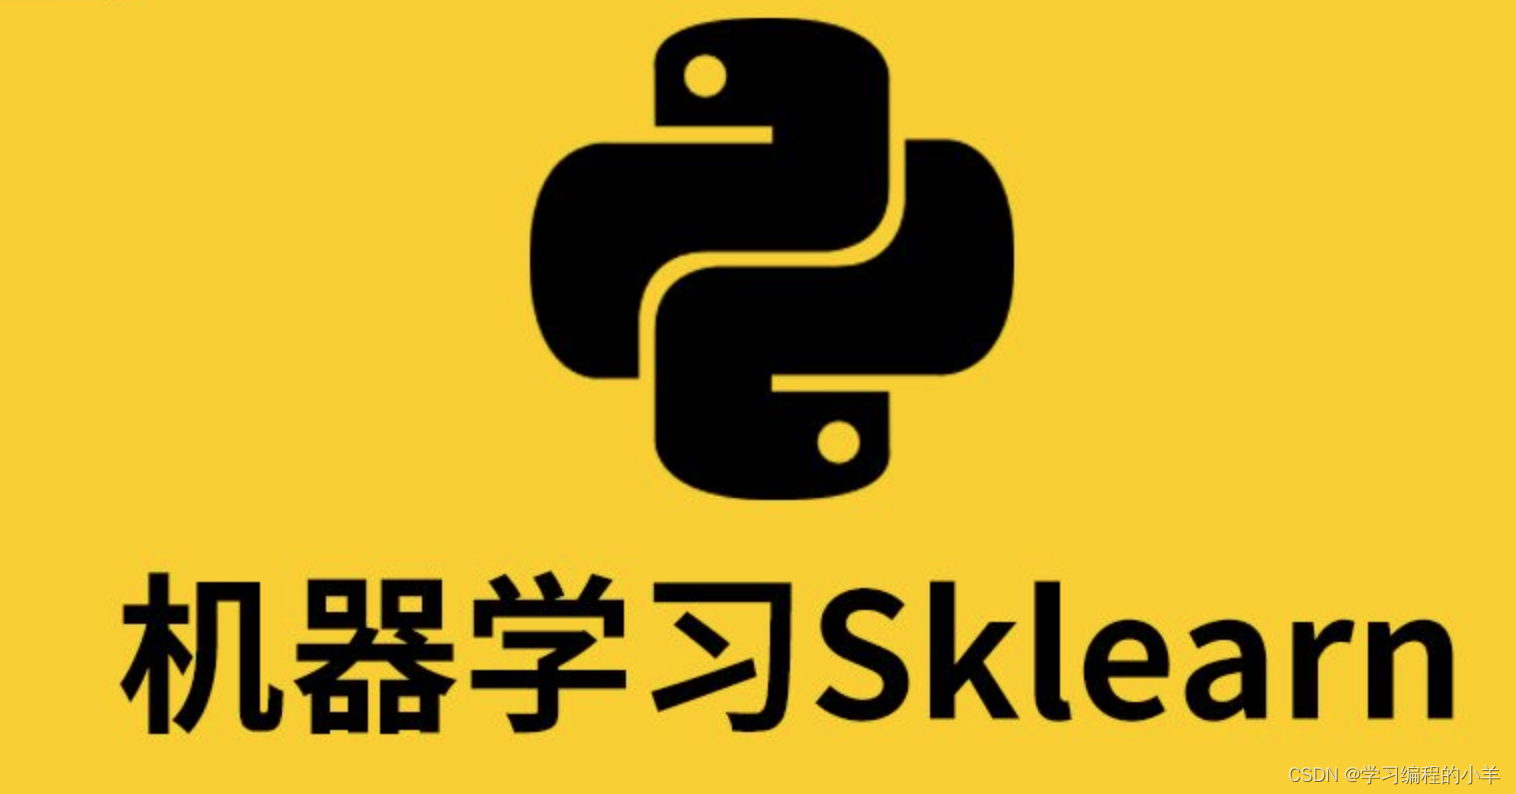 sklearn<span style='color:red;'>基础</span>教程：<span style='color:red;'>机器</span><span style='color:red;'>学习</span>模型<span style='color:red;'>的</span>构建与<span style='color:red;'>评估</span>